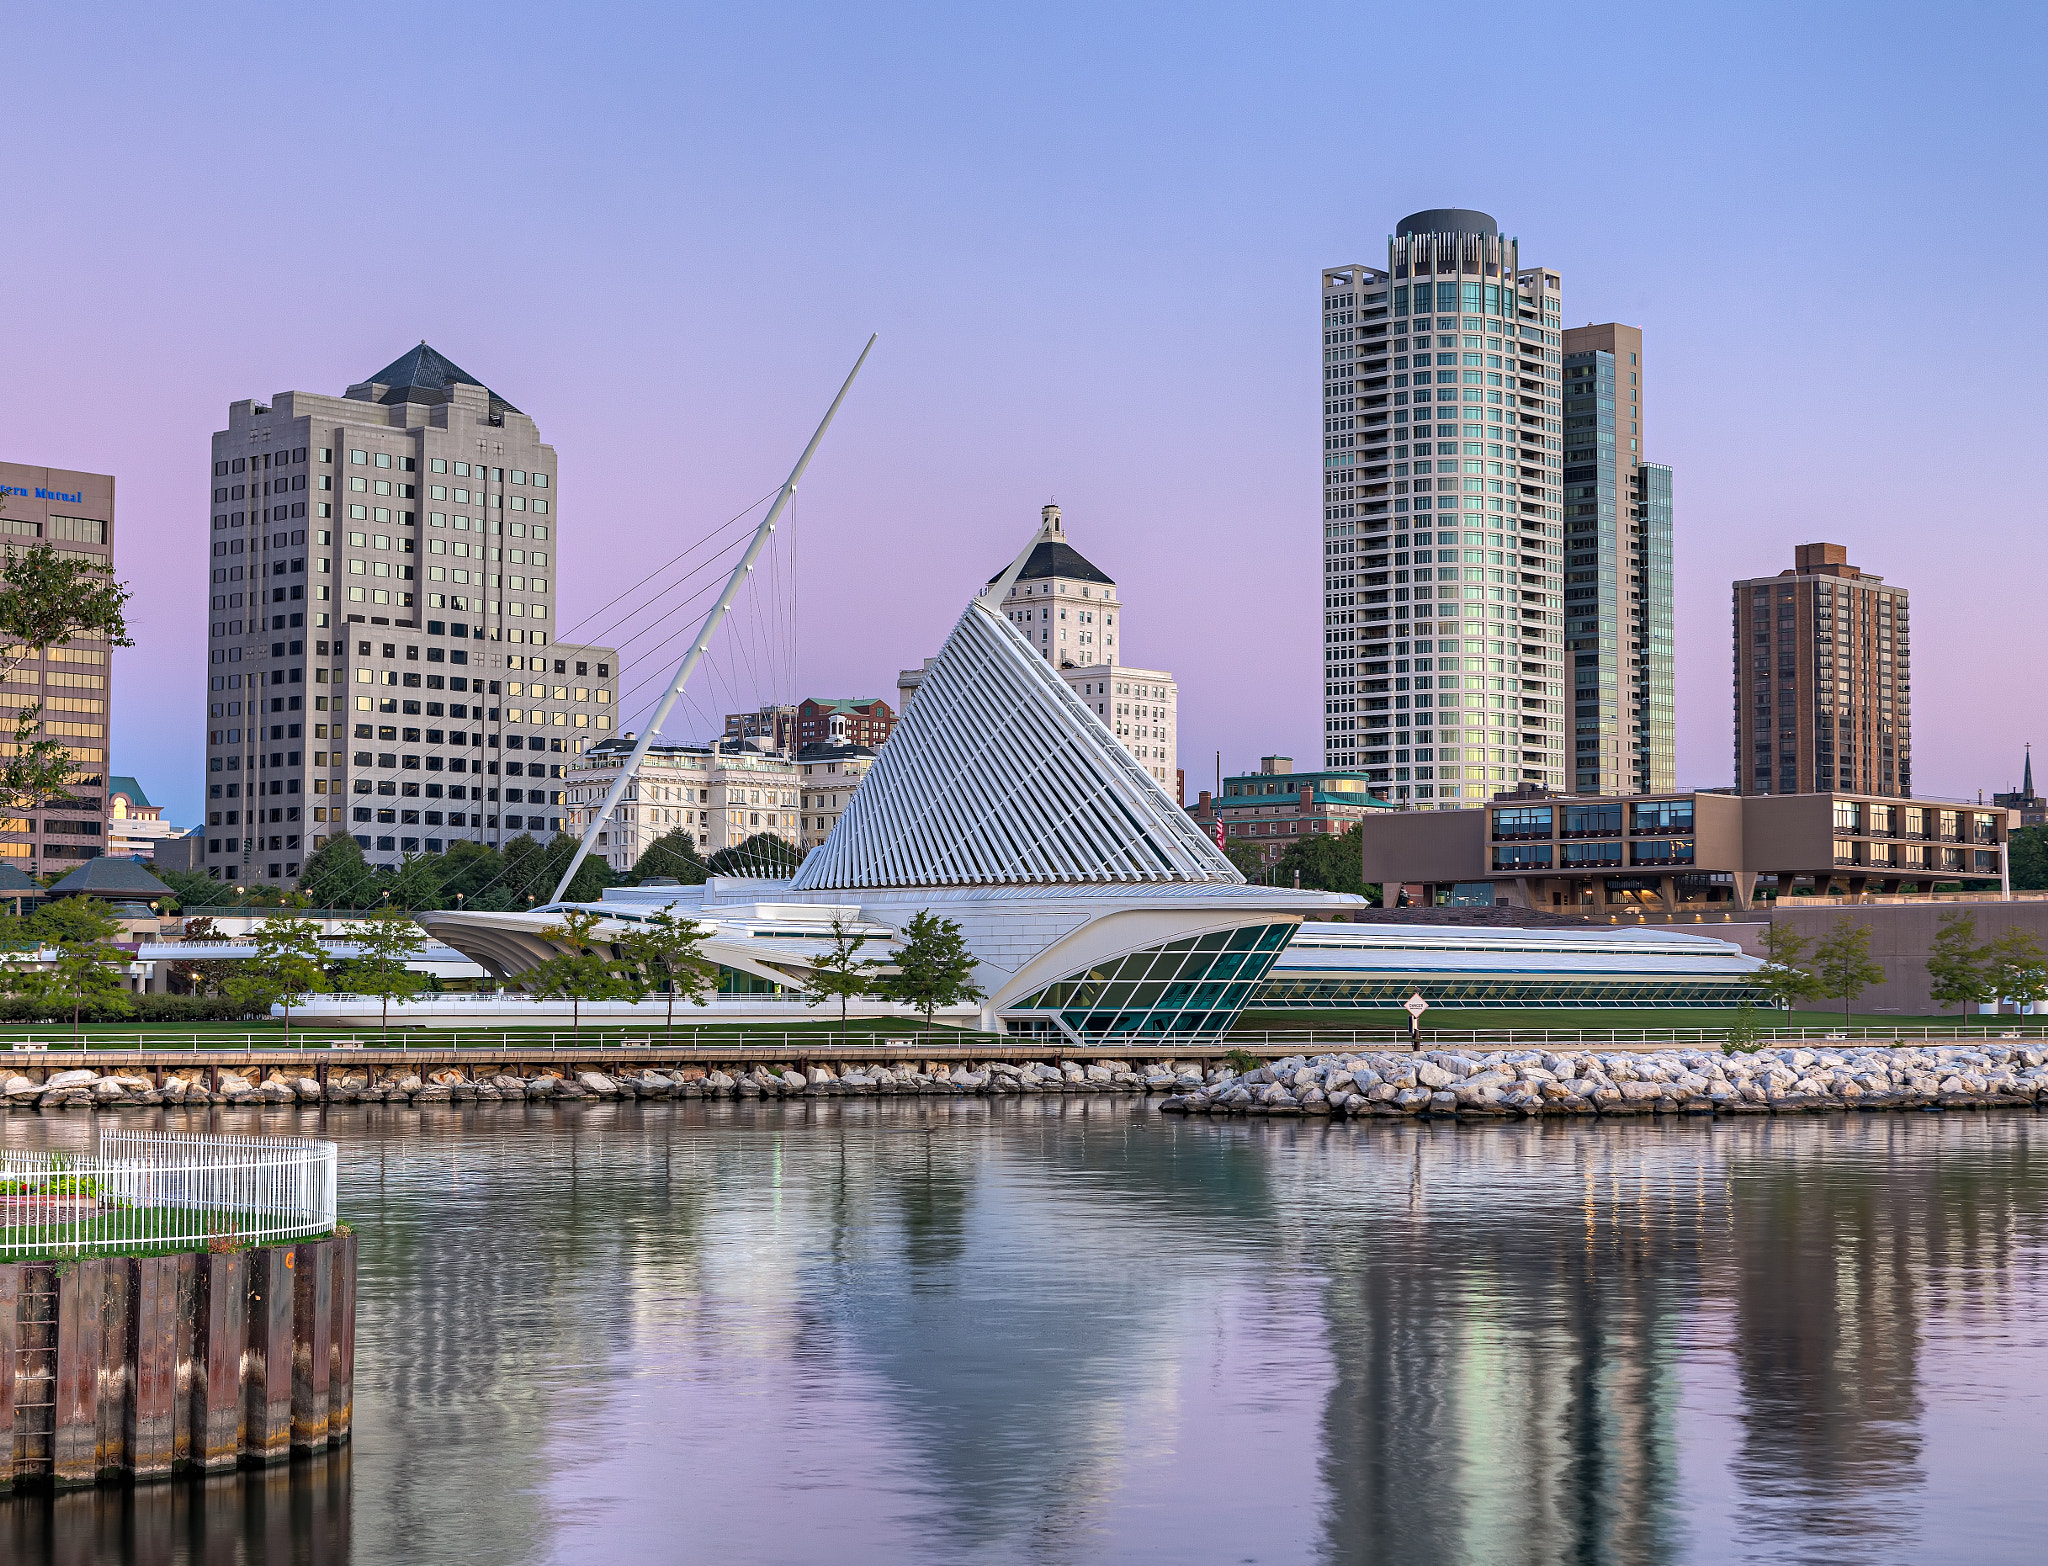 Milwaukee's Lakefront by Brian Behling Photo 13900893 / 500px